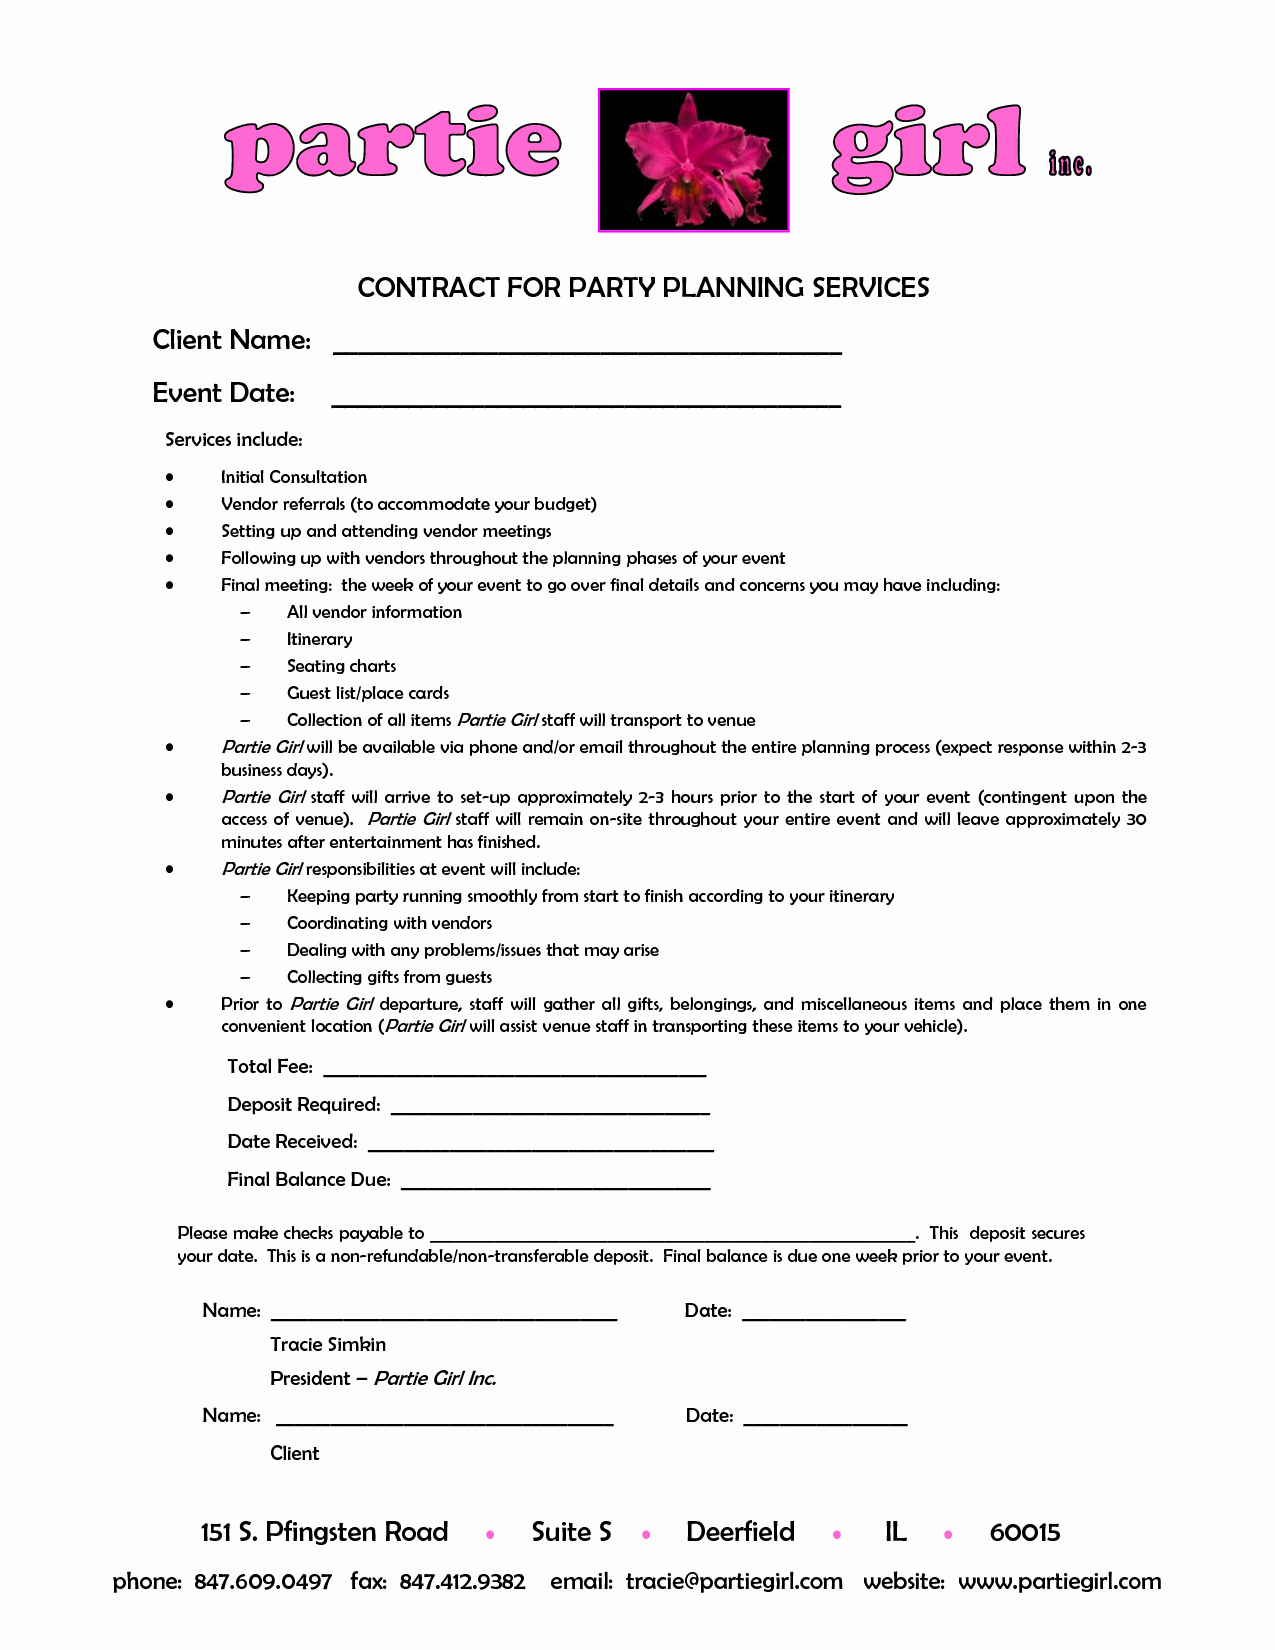 Party Planner Contract Template Google Search